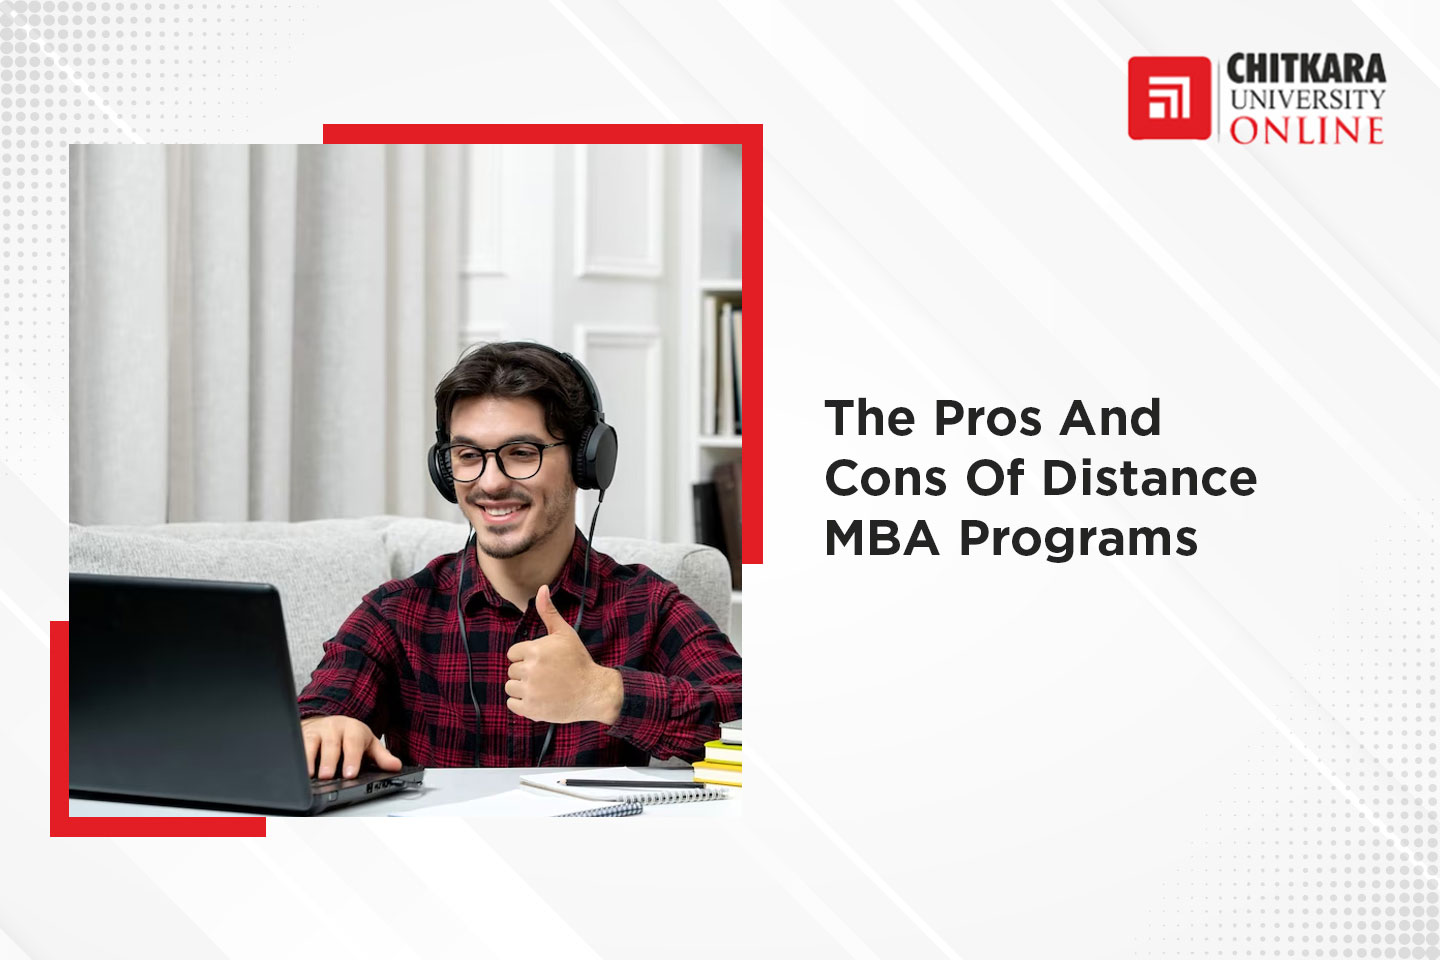 Pros And Cons Of Distance MBA Programs - ChitkaraU Online